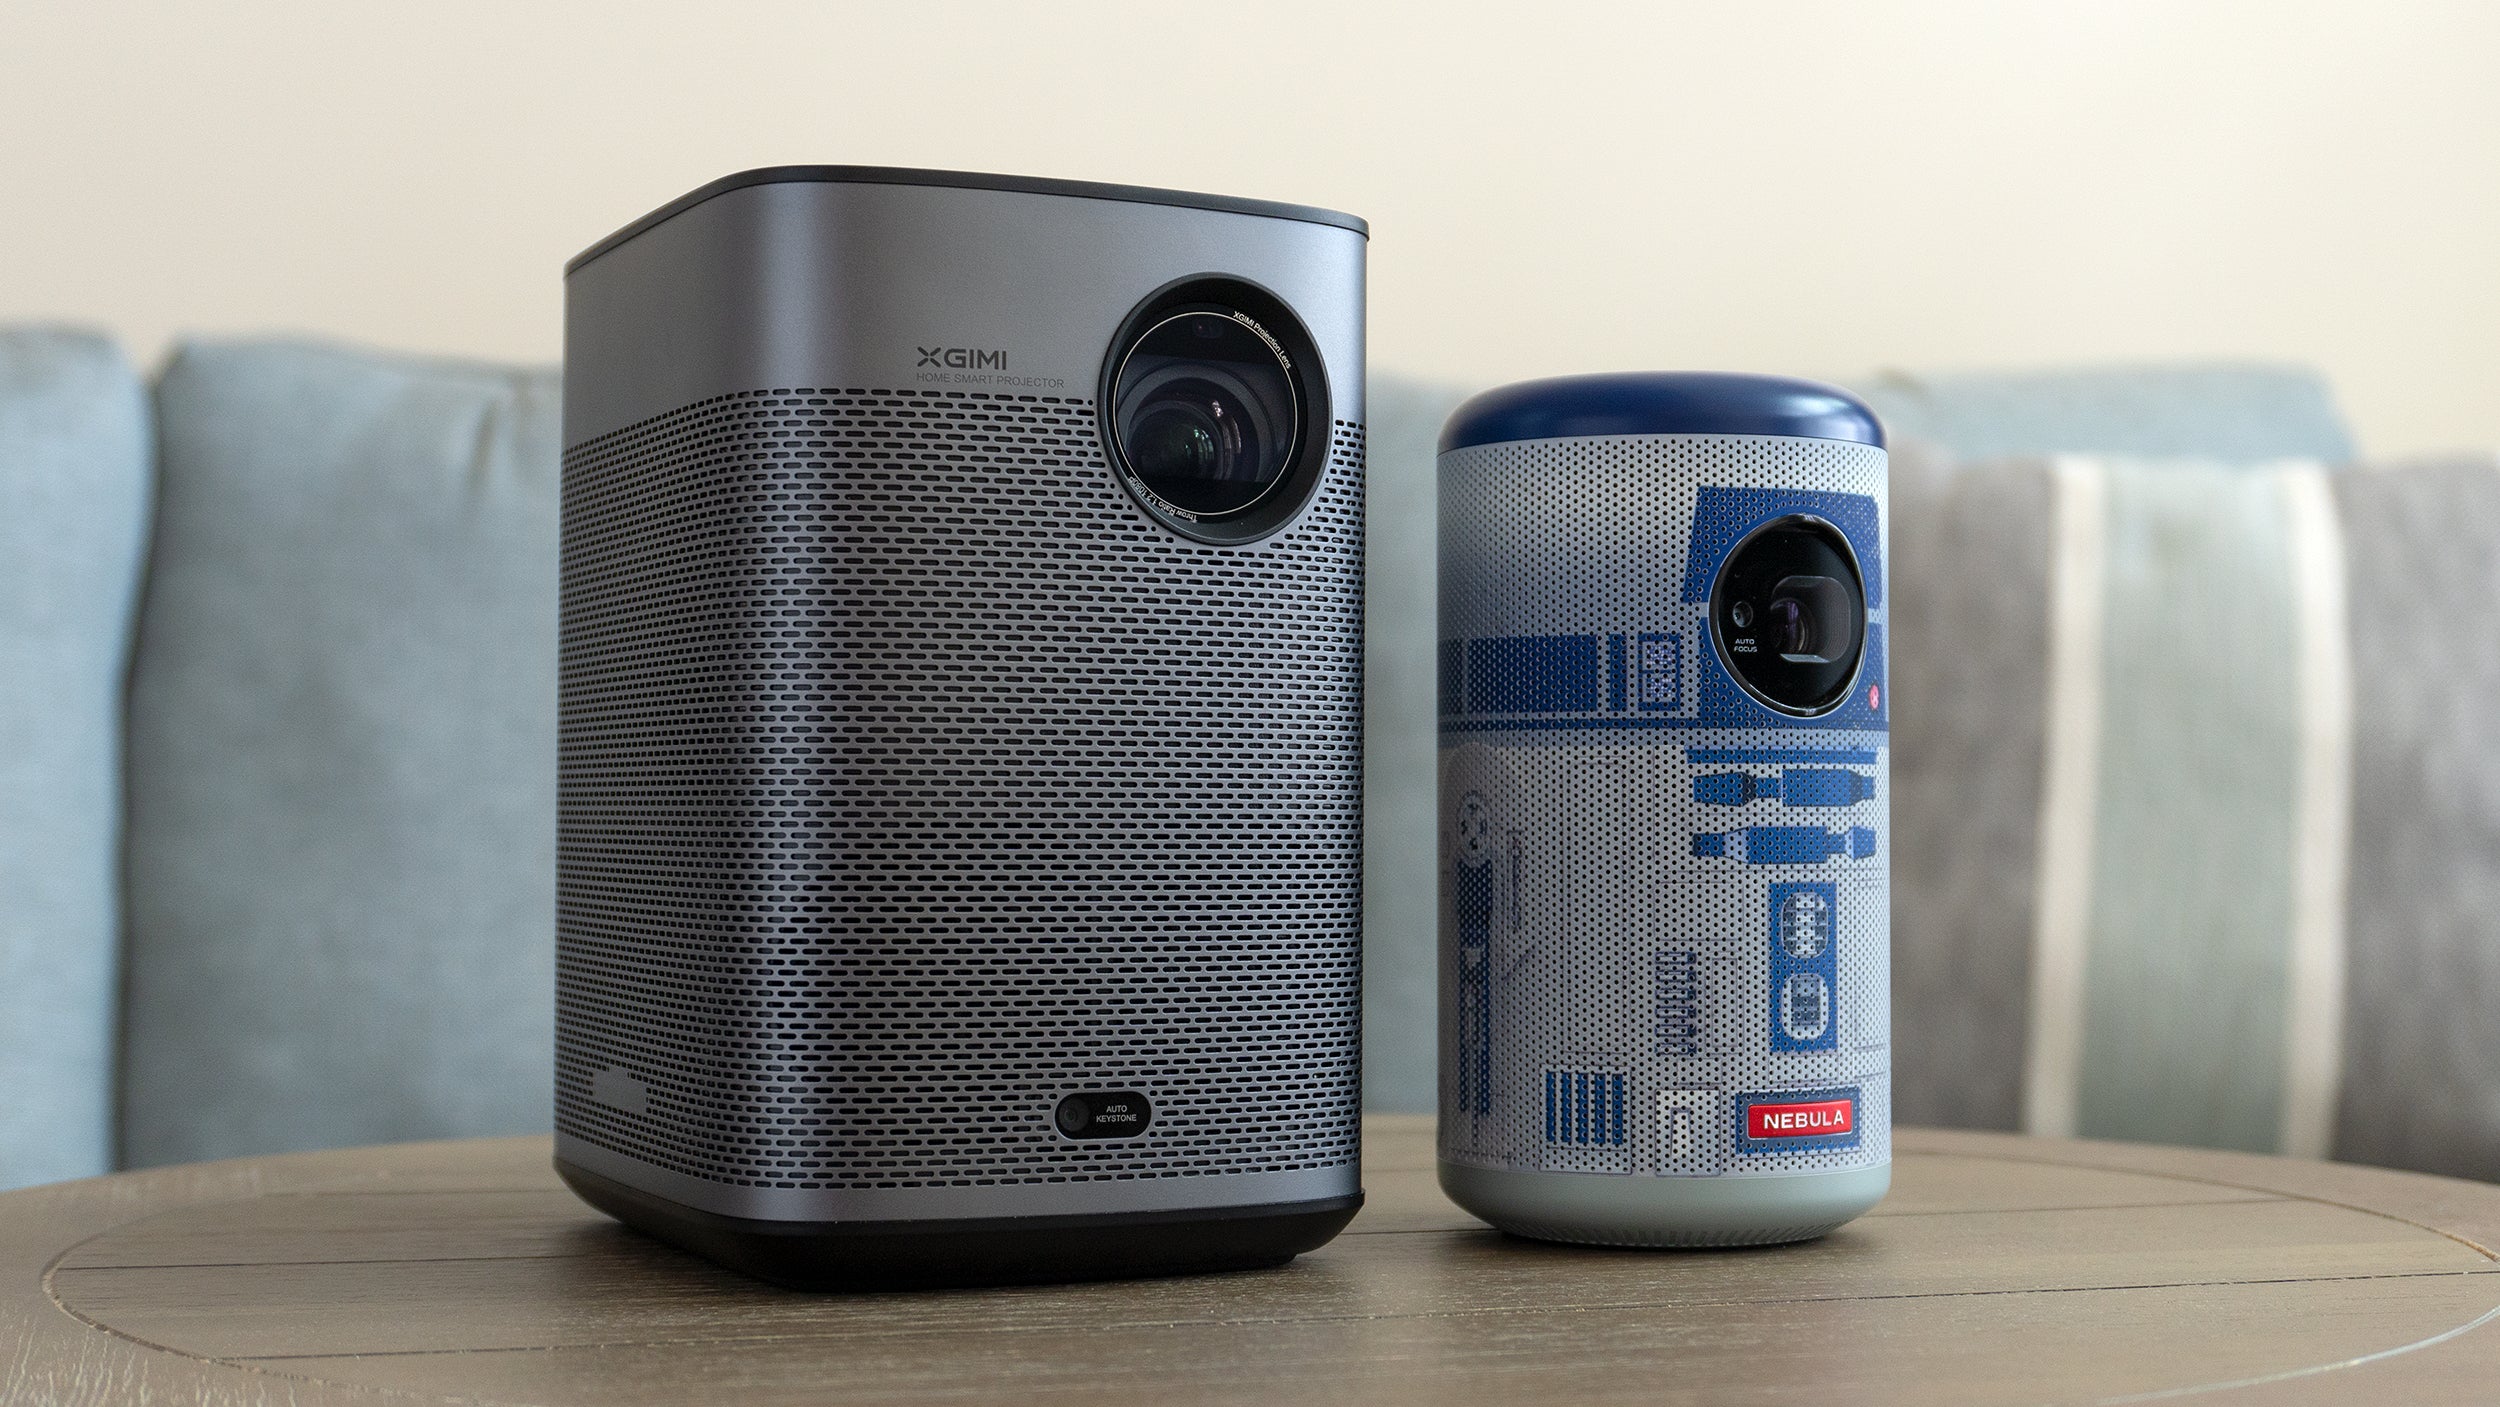 The XGIMI Halo+ (left) is quite a bit larger than the Anker Nebula Capsule II R2-D2 Edition projector (right) which itself is only slightly larger than a soda can. (Photo: Andrew Liszewski | Gizmodo)